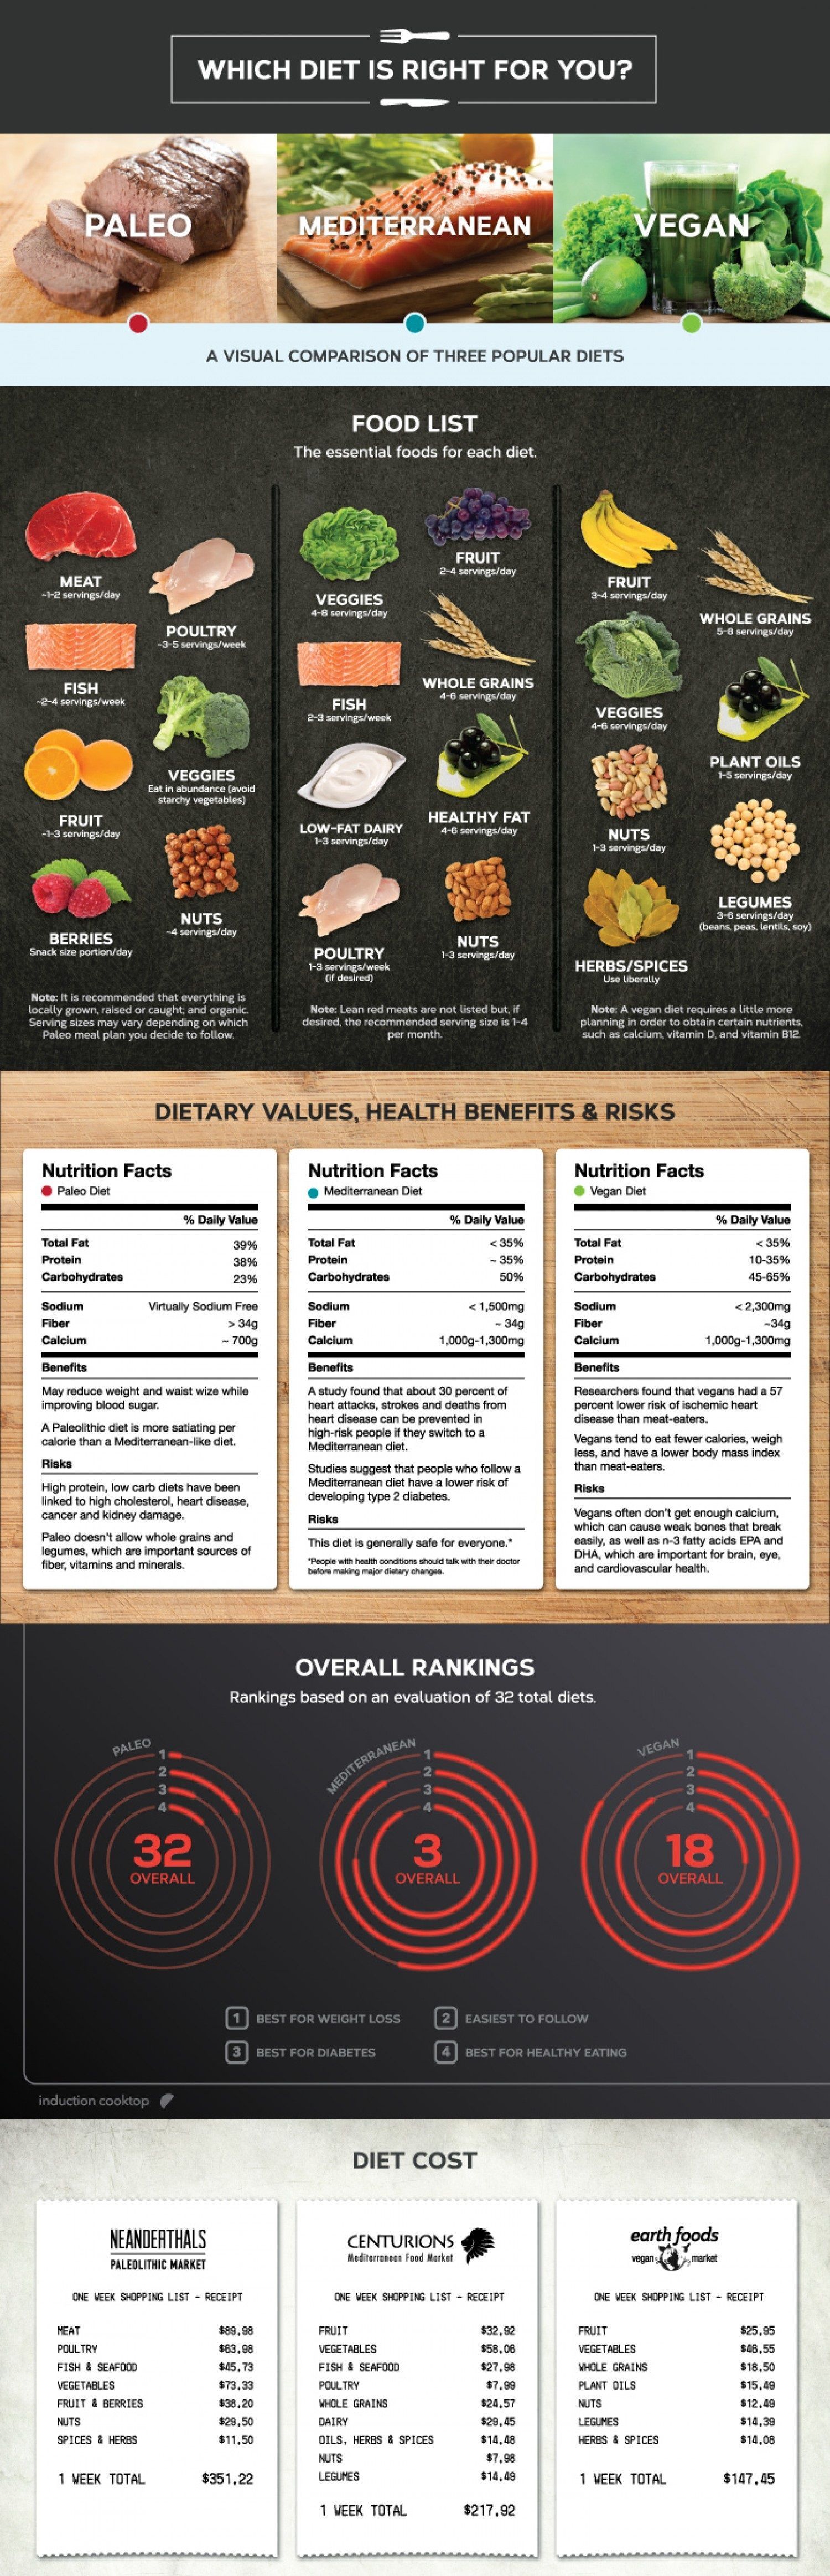 Considering starting a new Paleo or Vegan diet? Check out the rankings of 3 popular diets to choose whats best for you!